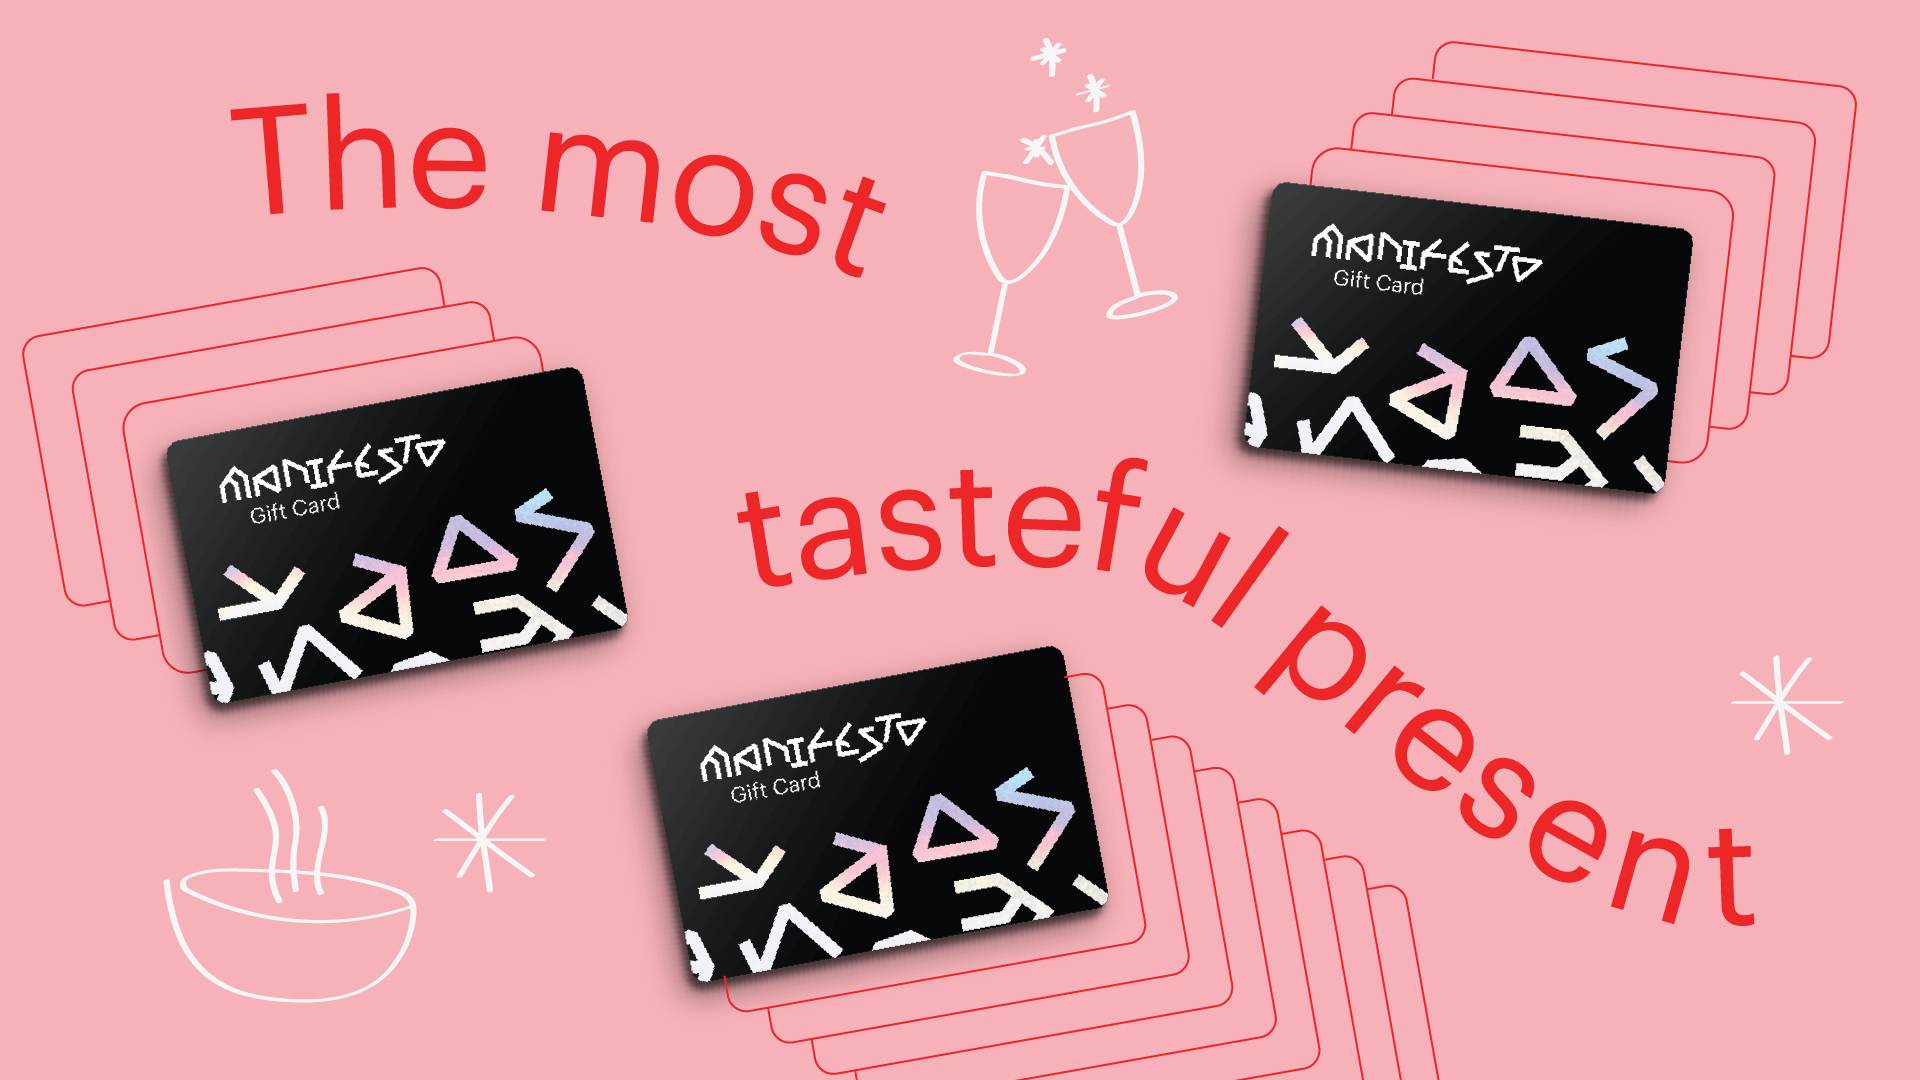 Get Your Manifesto Card: Perfect as a Gift, an Event Pass or a Cash Alternative